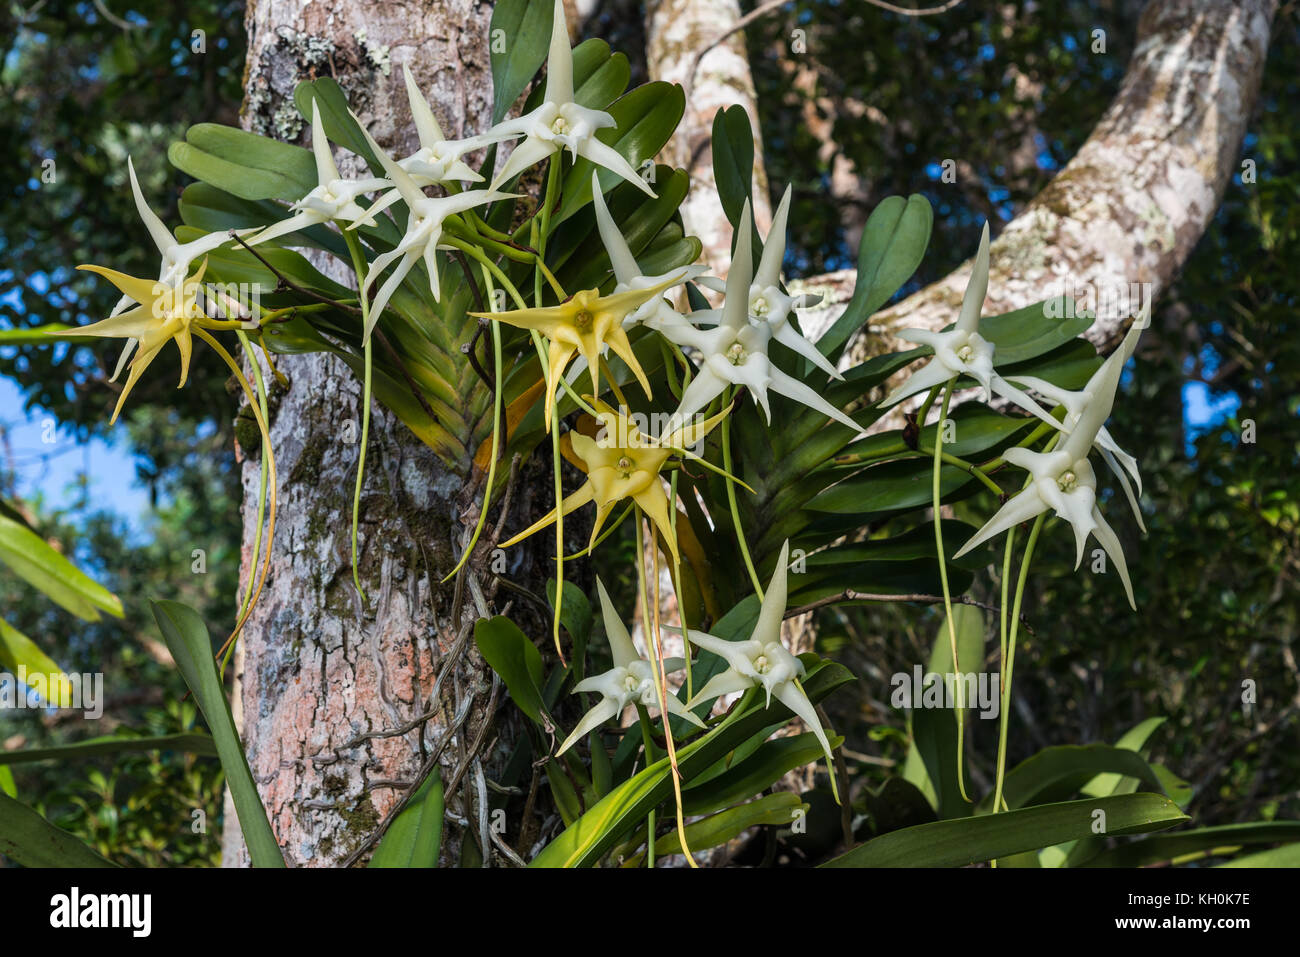 Darwin's Orchid (Angraecum sesquipedale) in full bloom in its native habitat. Madagascar, Africa. Stock Photo